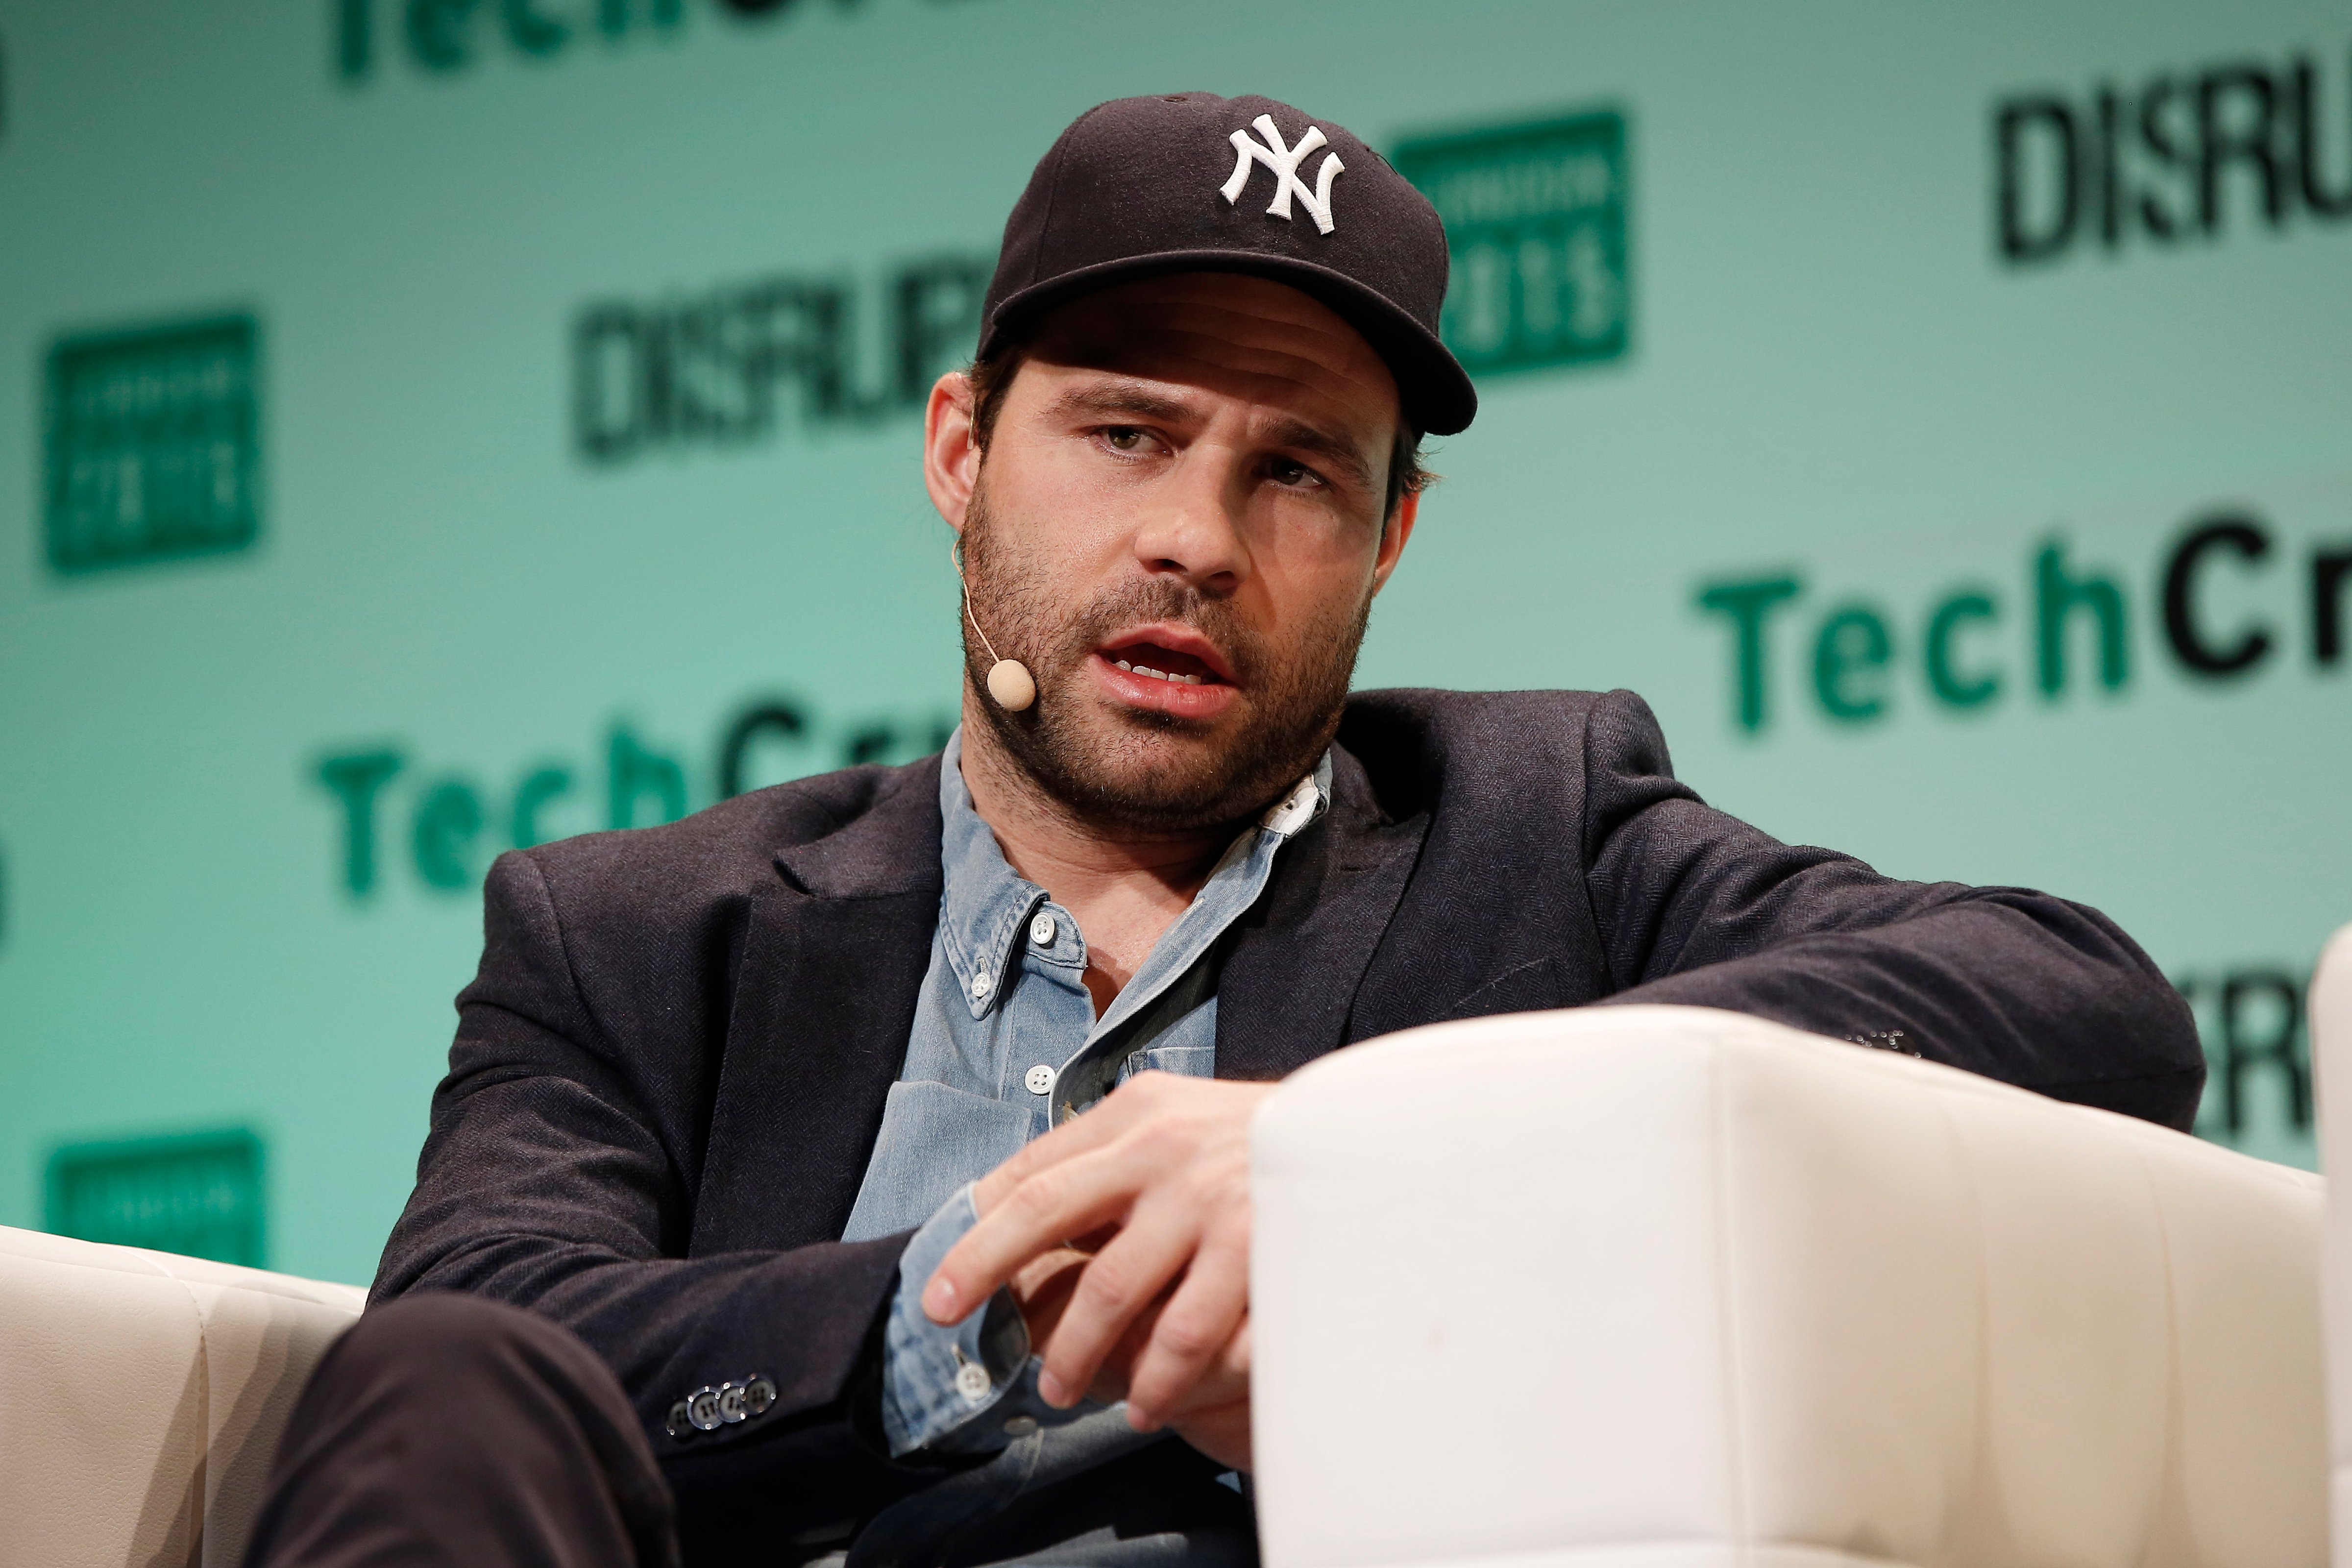 Founder & CEO at Postmates Bastian Lehmann during TechCrunch Disrupt London 2015 - Day 1 at Copper Box Arena on December 7, 2015 in London, England. (John Phillips—Getty Images for TechCrunch)